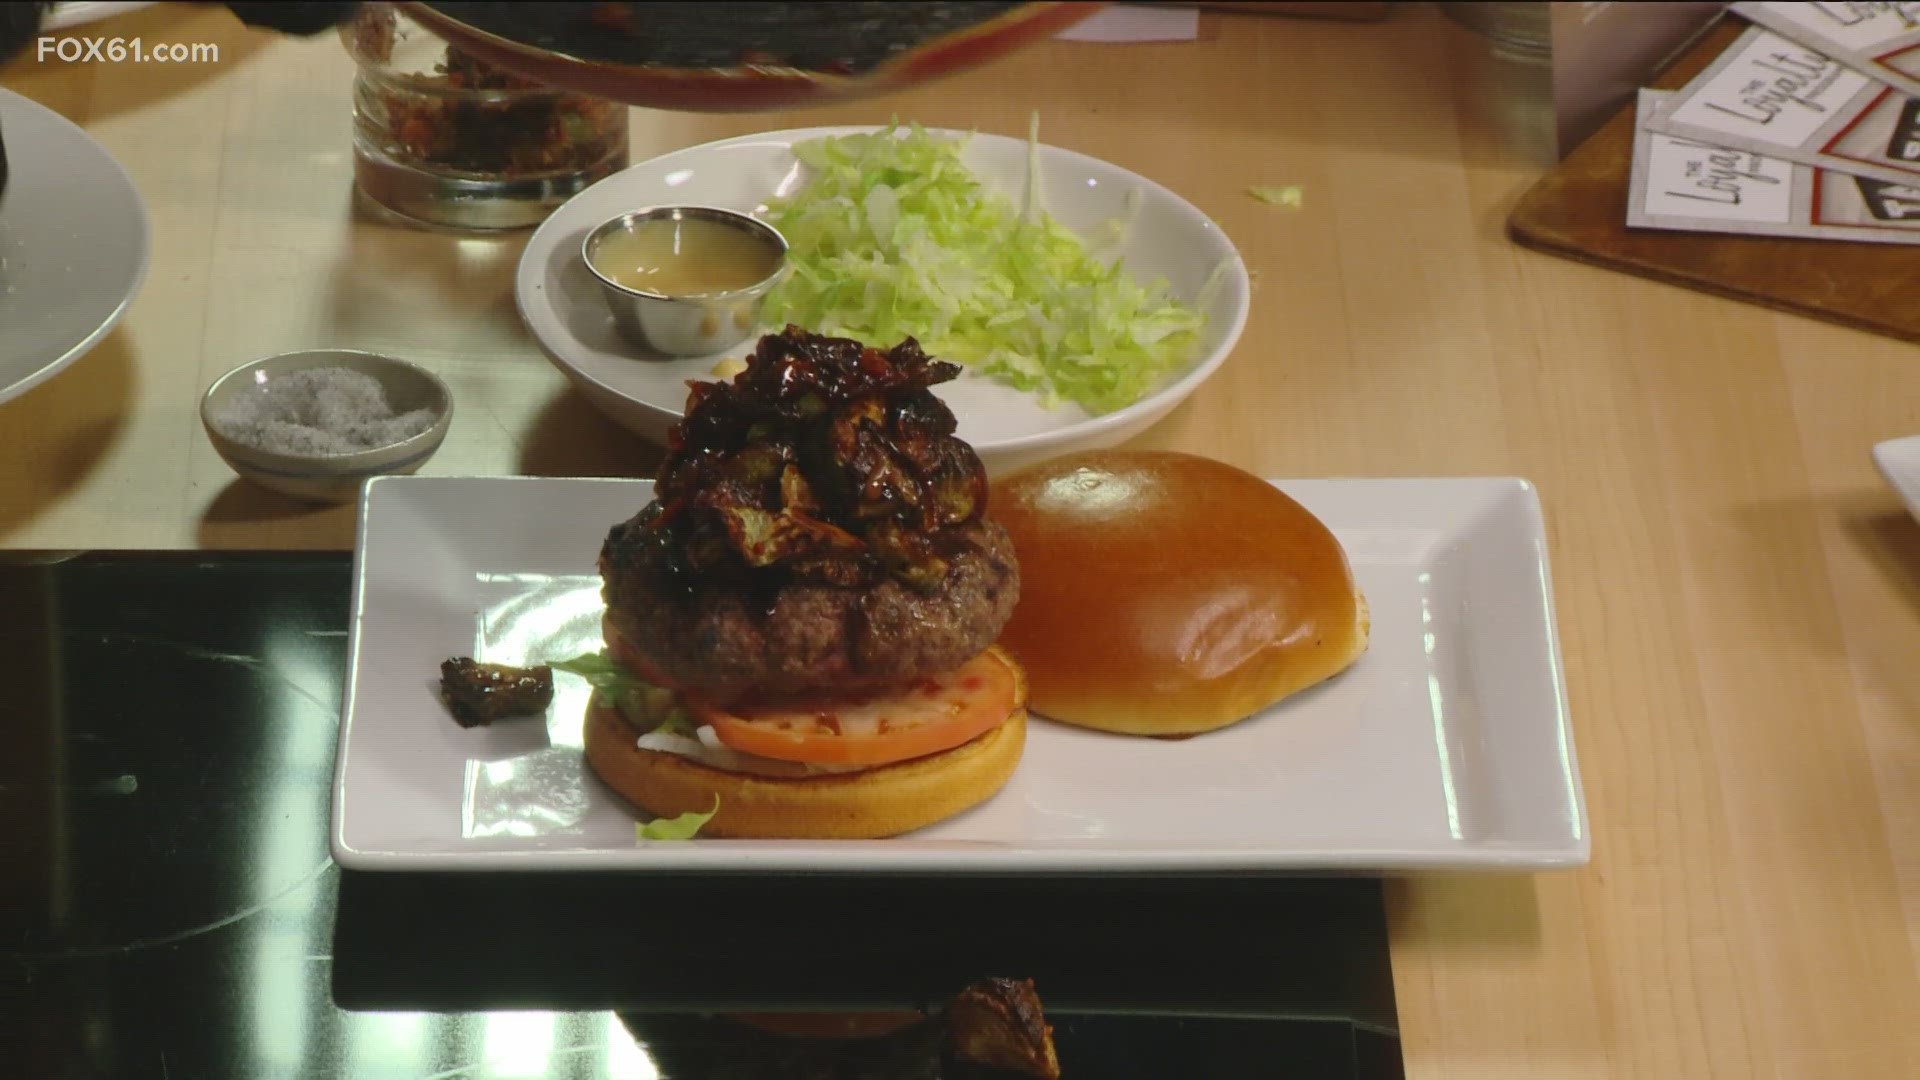 Wood-n-Tap shows off its winning burger from a hamburger showdown its chefs competed in.